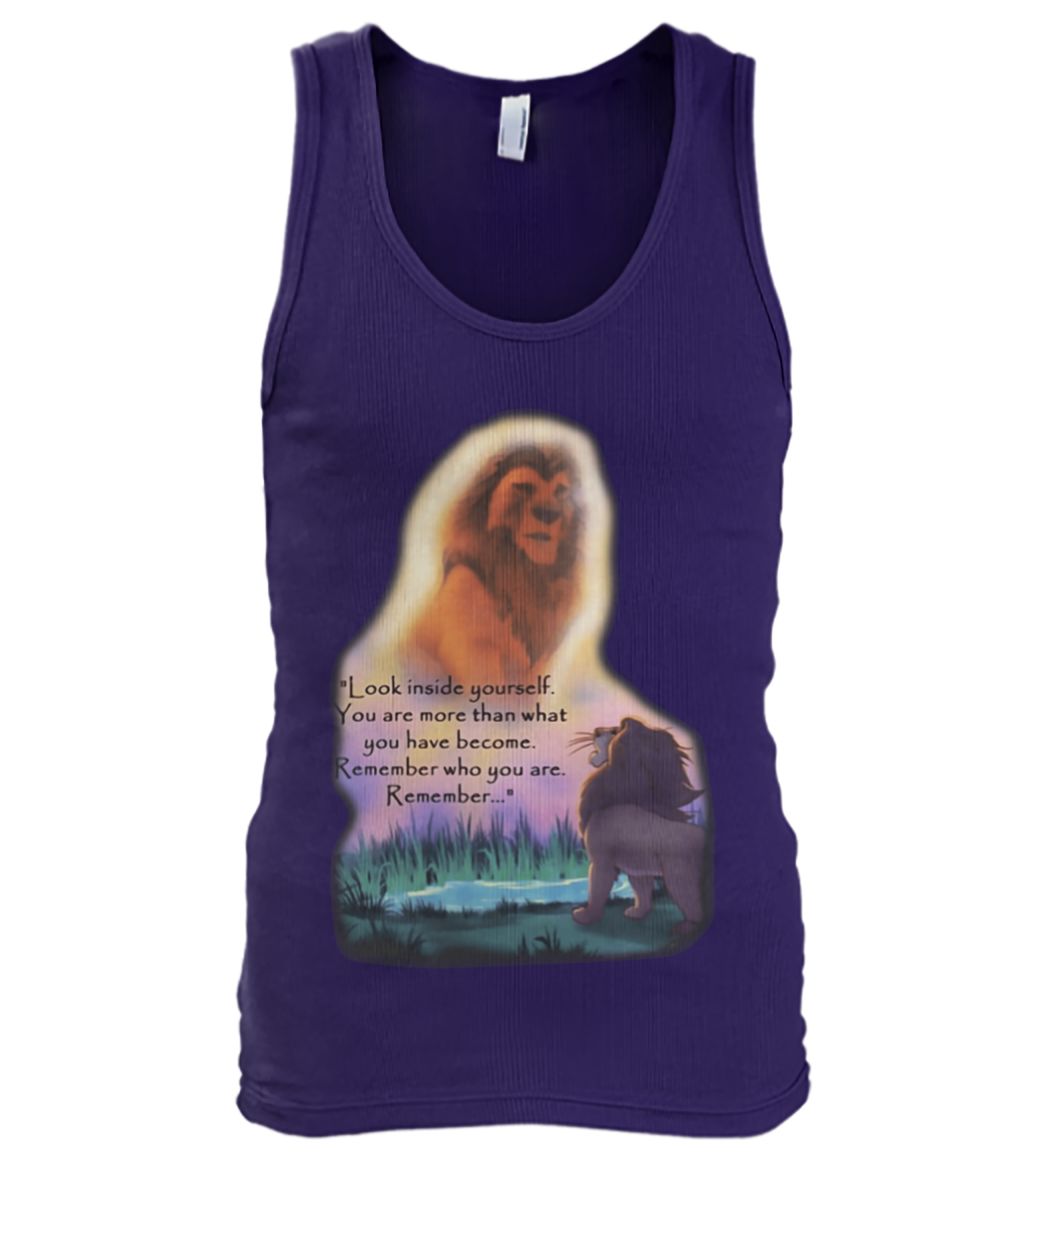 Look inside yourself you are more than what you have become the lion king men's tank top